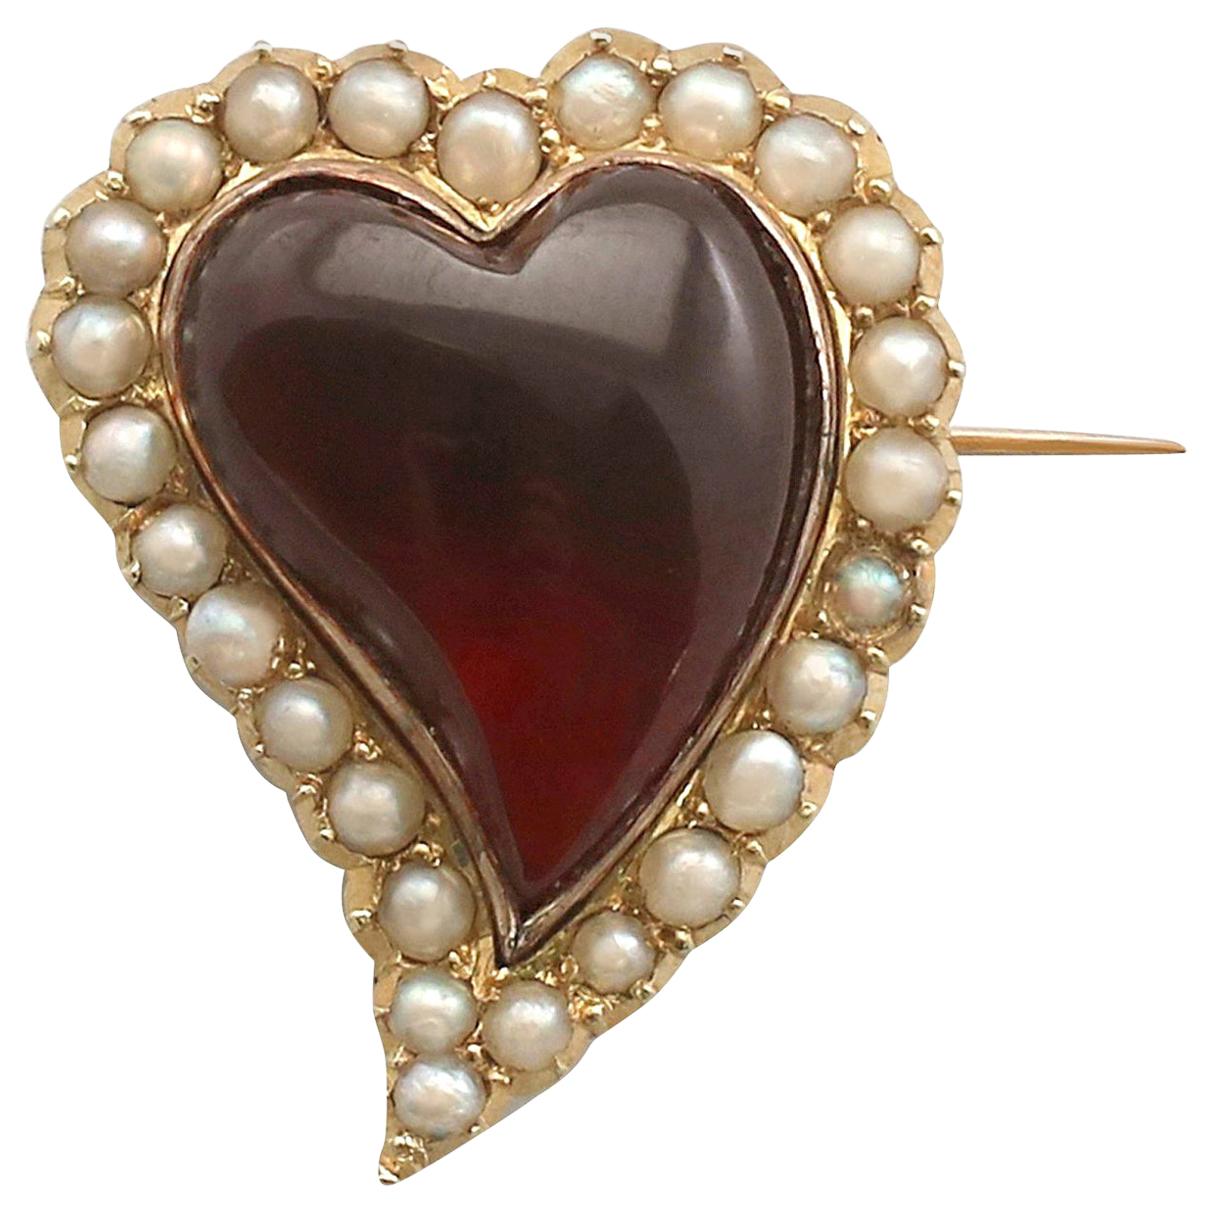 Antique 1890s 5.65 Carat Garnet and Seed Pearl Yellow Gold Heart Brooch